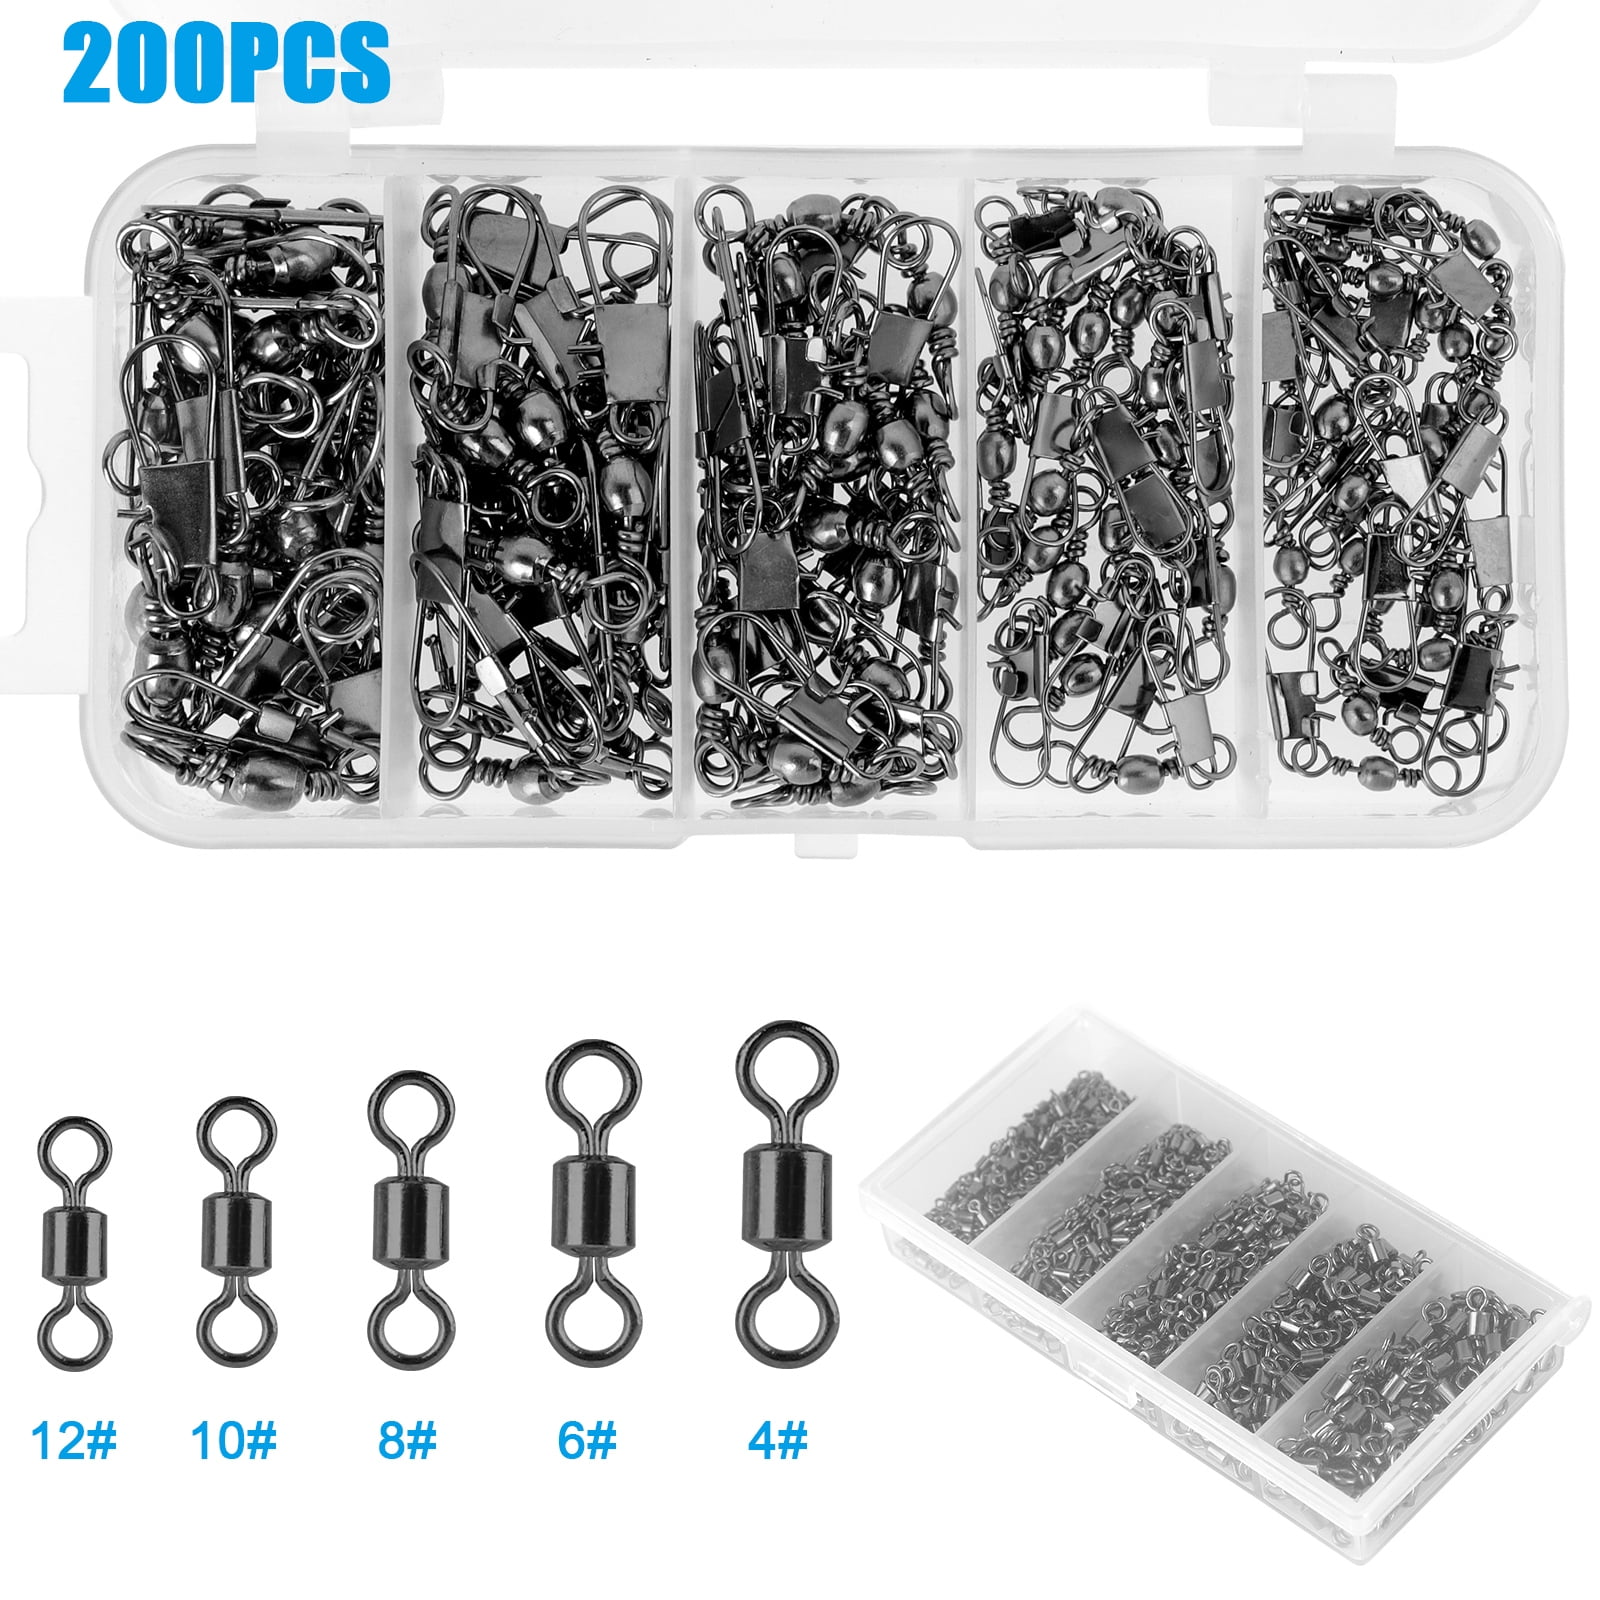 200-100pcs-Fishing-Swivels-TSV-Stainless-Steel-High-Strength-Rolling-Swivels-Swivel-Lock-Snap-Freshwater-Saltwater-Tackle-Kit-Accessories-Size-2-4